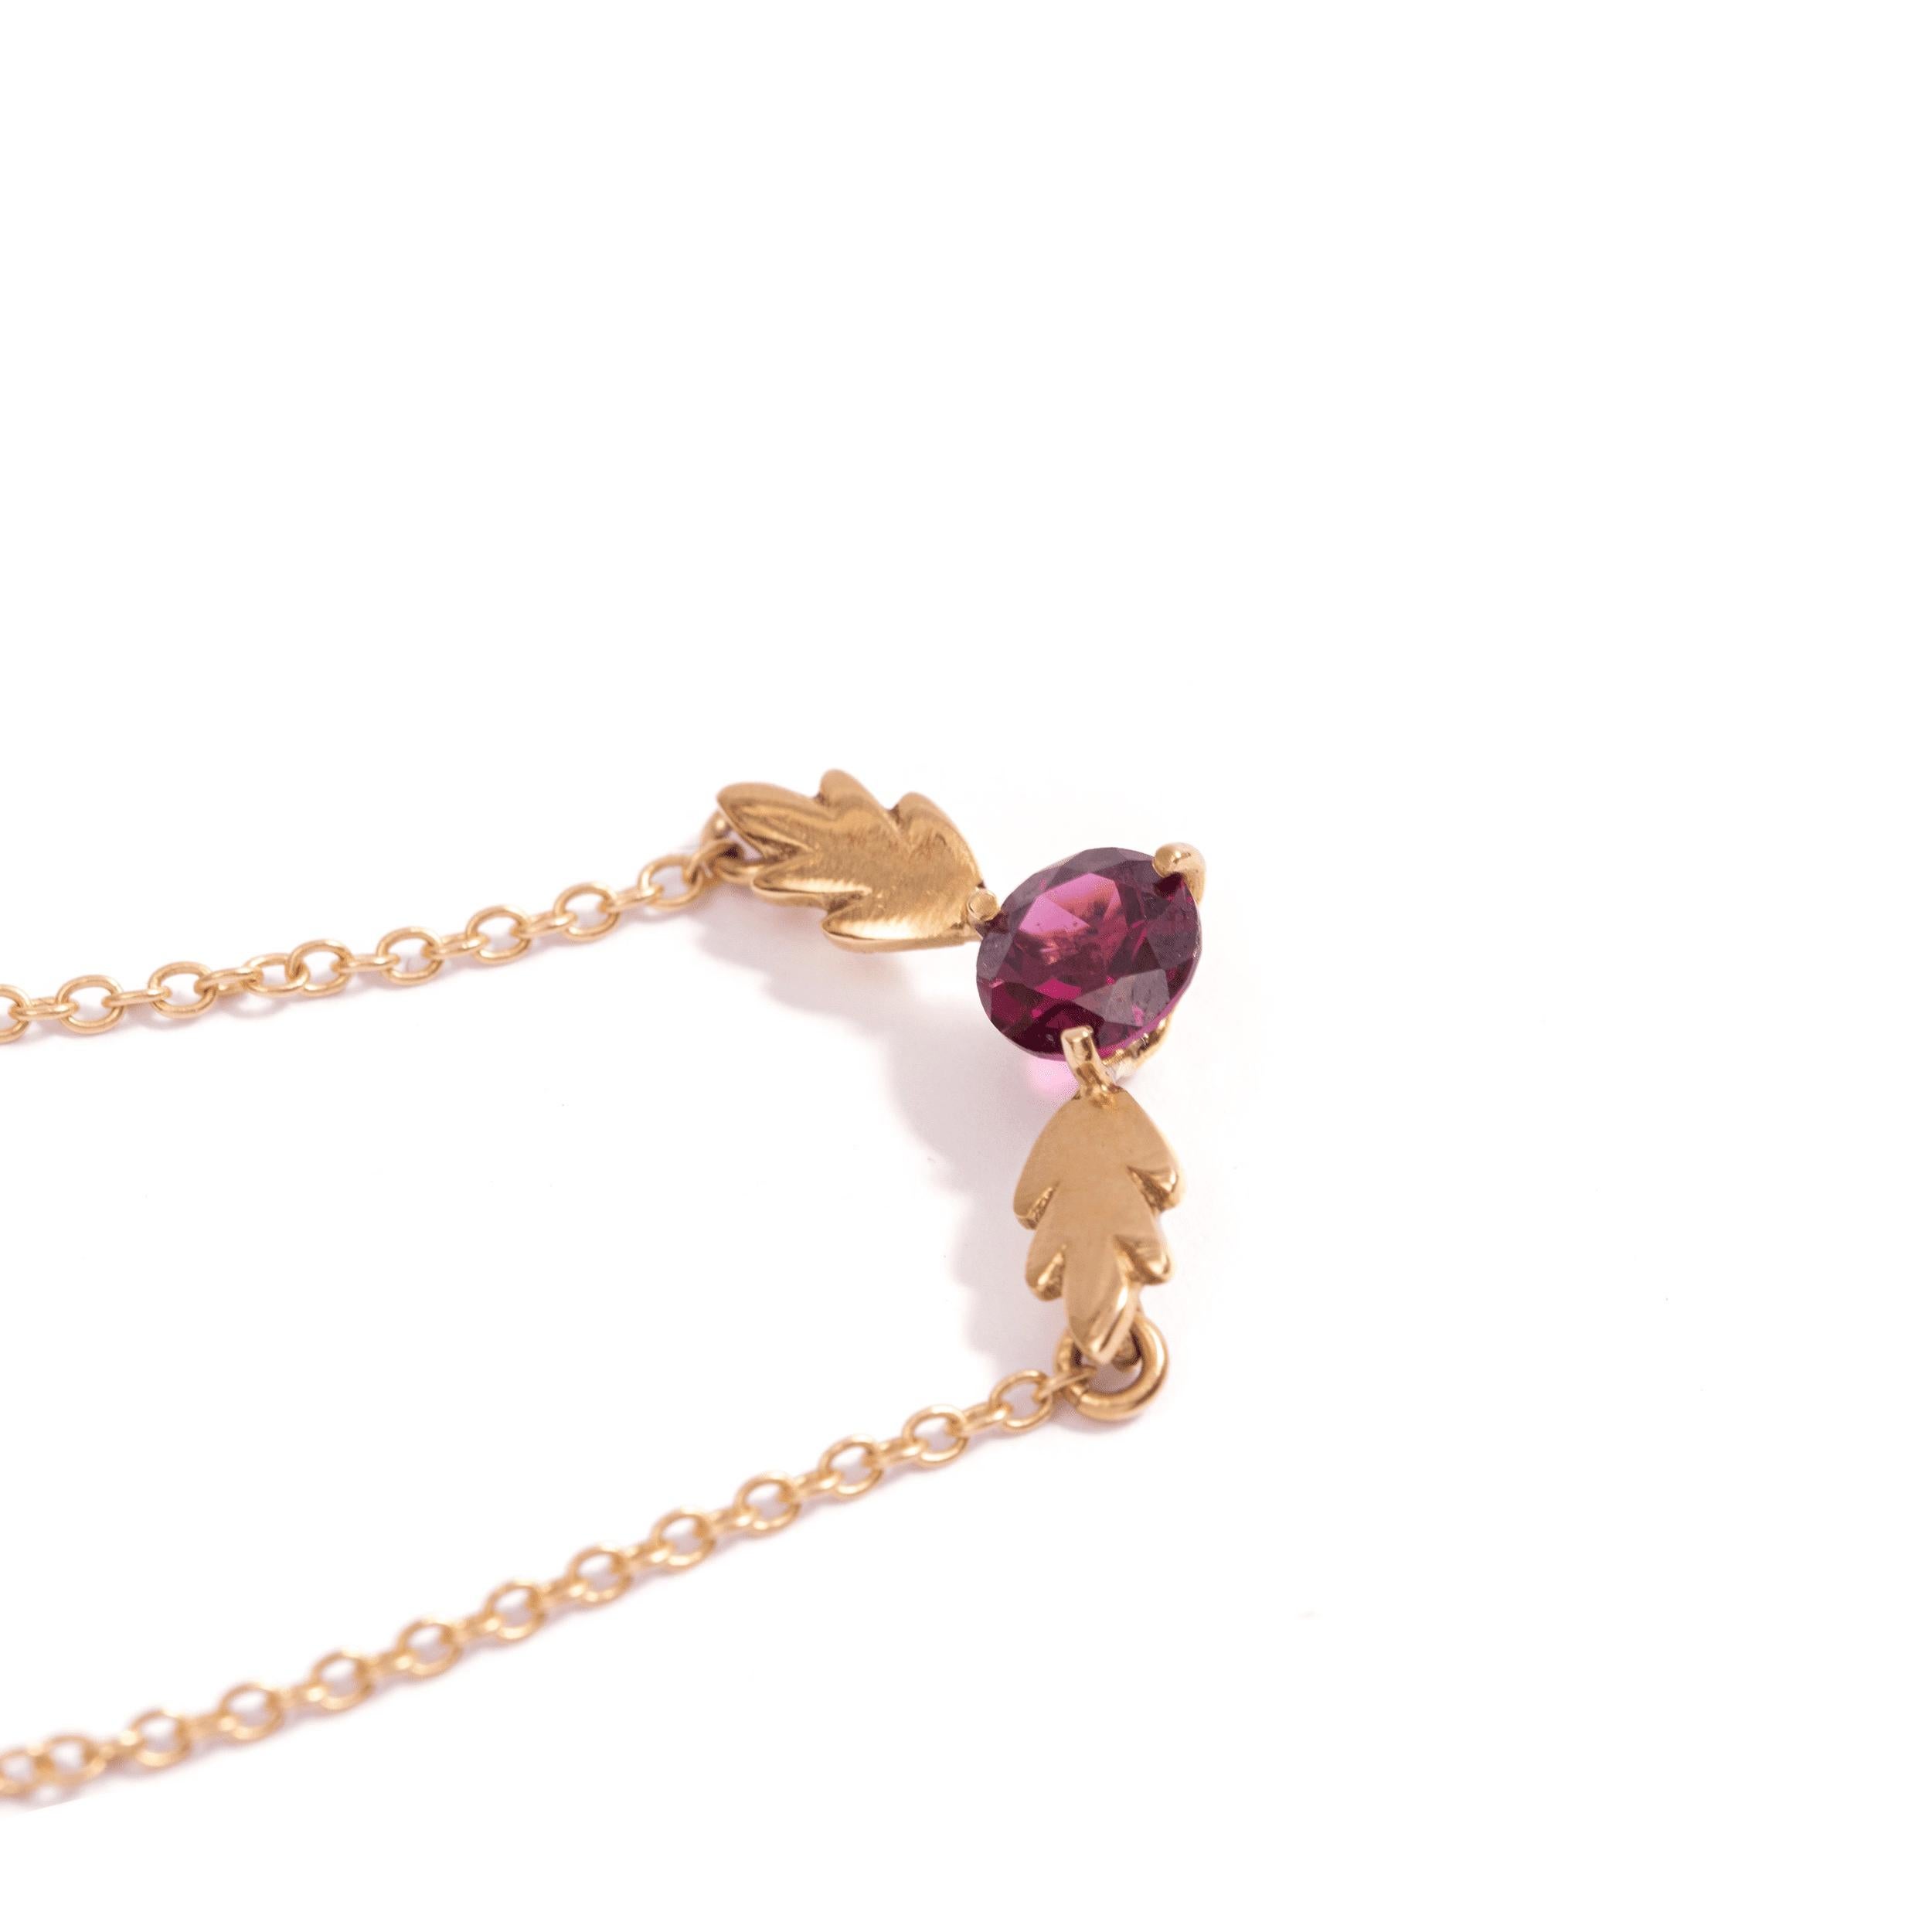 Leaf Pendant Necklace by Regina Gambatesa at Second Petale Gallery

About Gemstones:

Gold 18kt, yellow gold
Rhodolite

ABOUT the CREATOR
REGINA GAMBATESA : AN ARTIST OF SPIRIT AND FORM
Regina Gambatesa is a jewelry artist who strives to transform